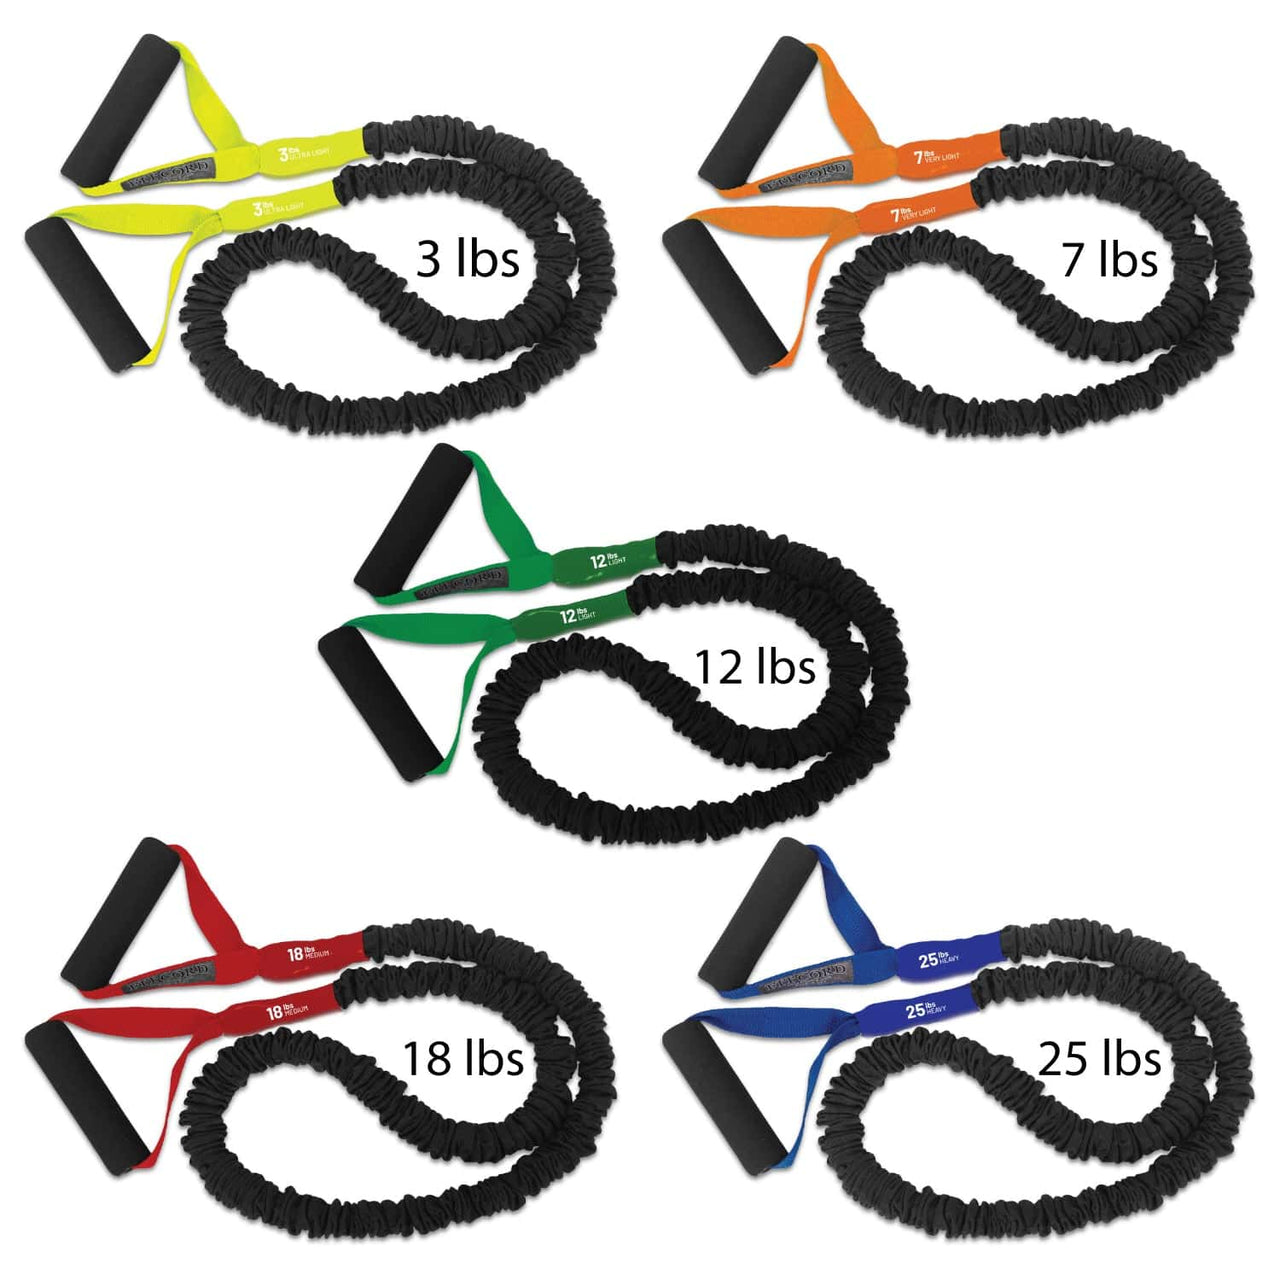 FitCord Resistance Band 5 Packs